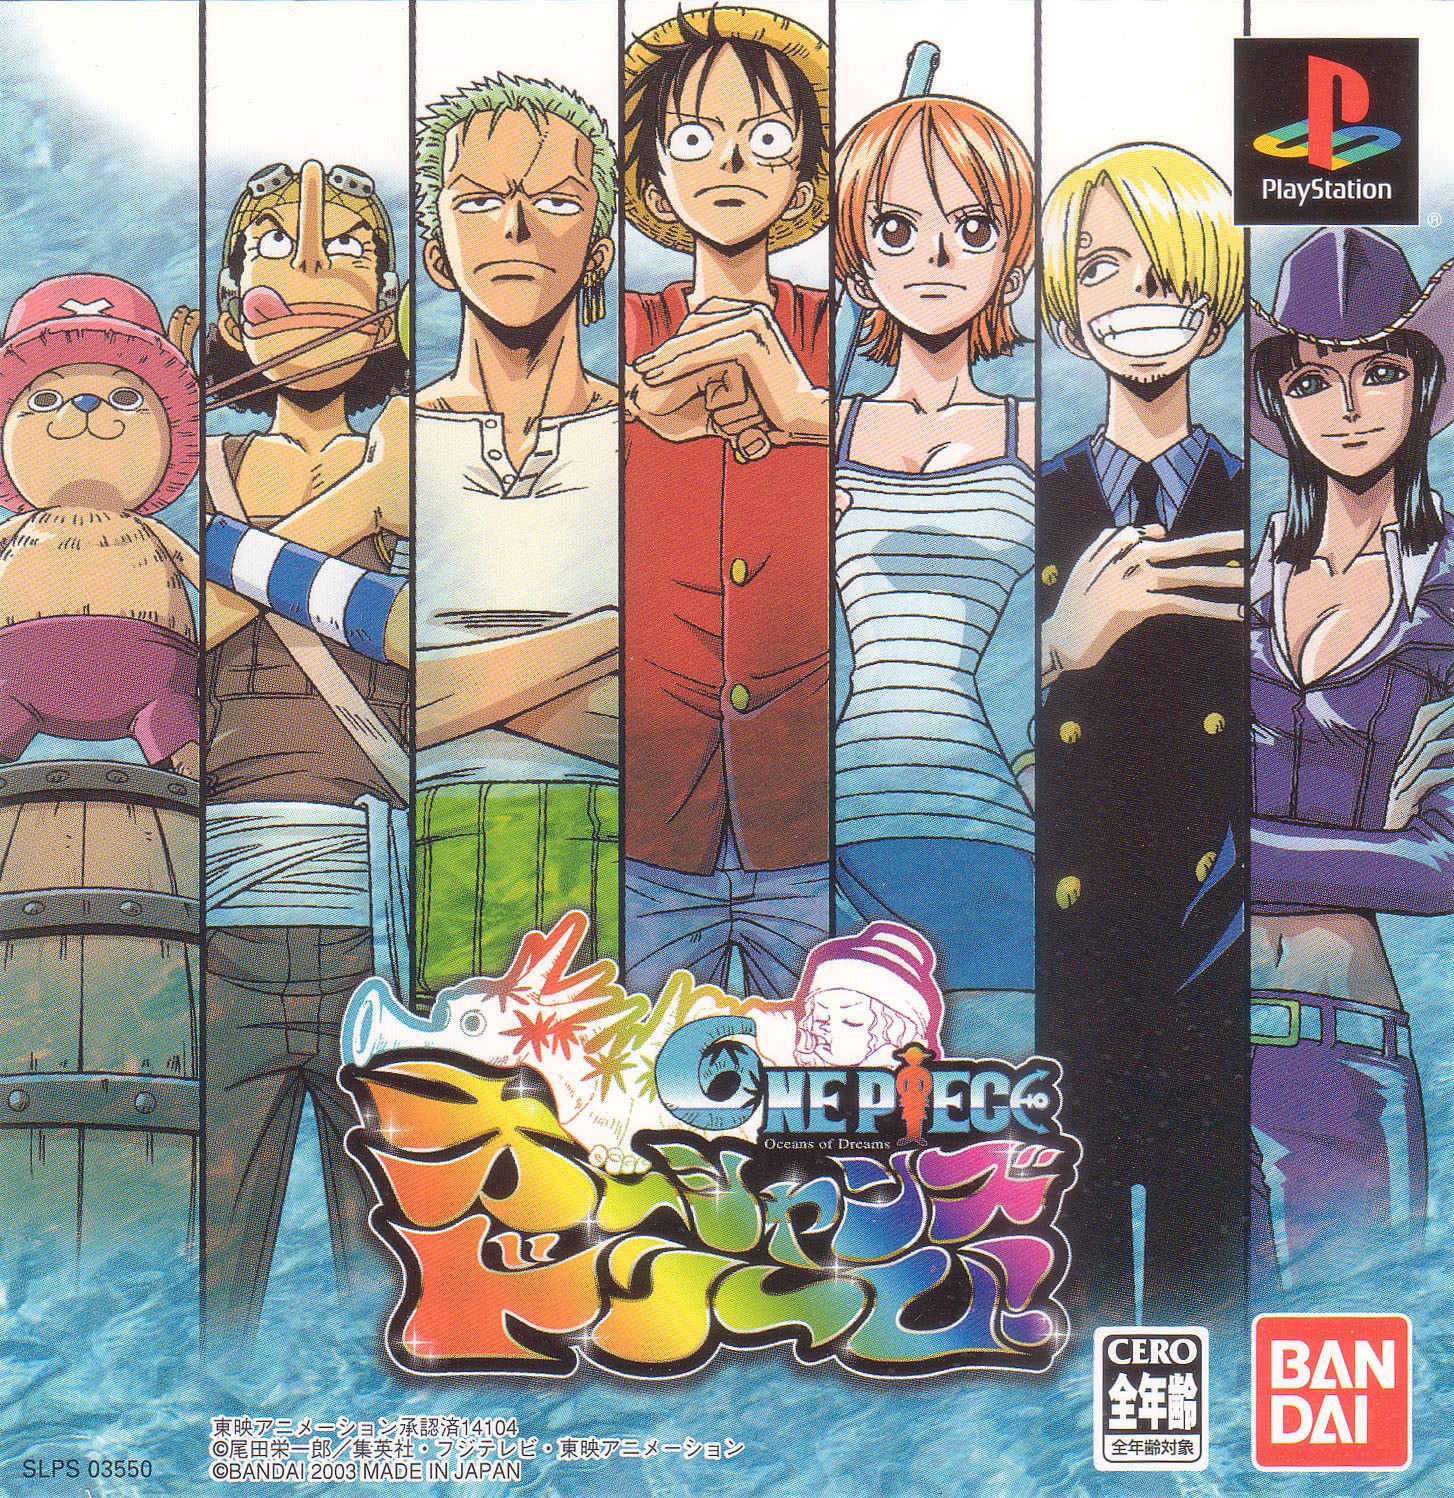 From TV Animation - One Piece - Oceans Of Dreams PSX cover